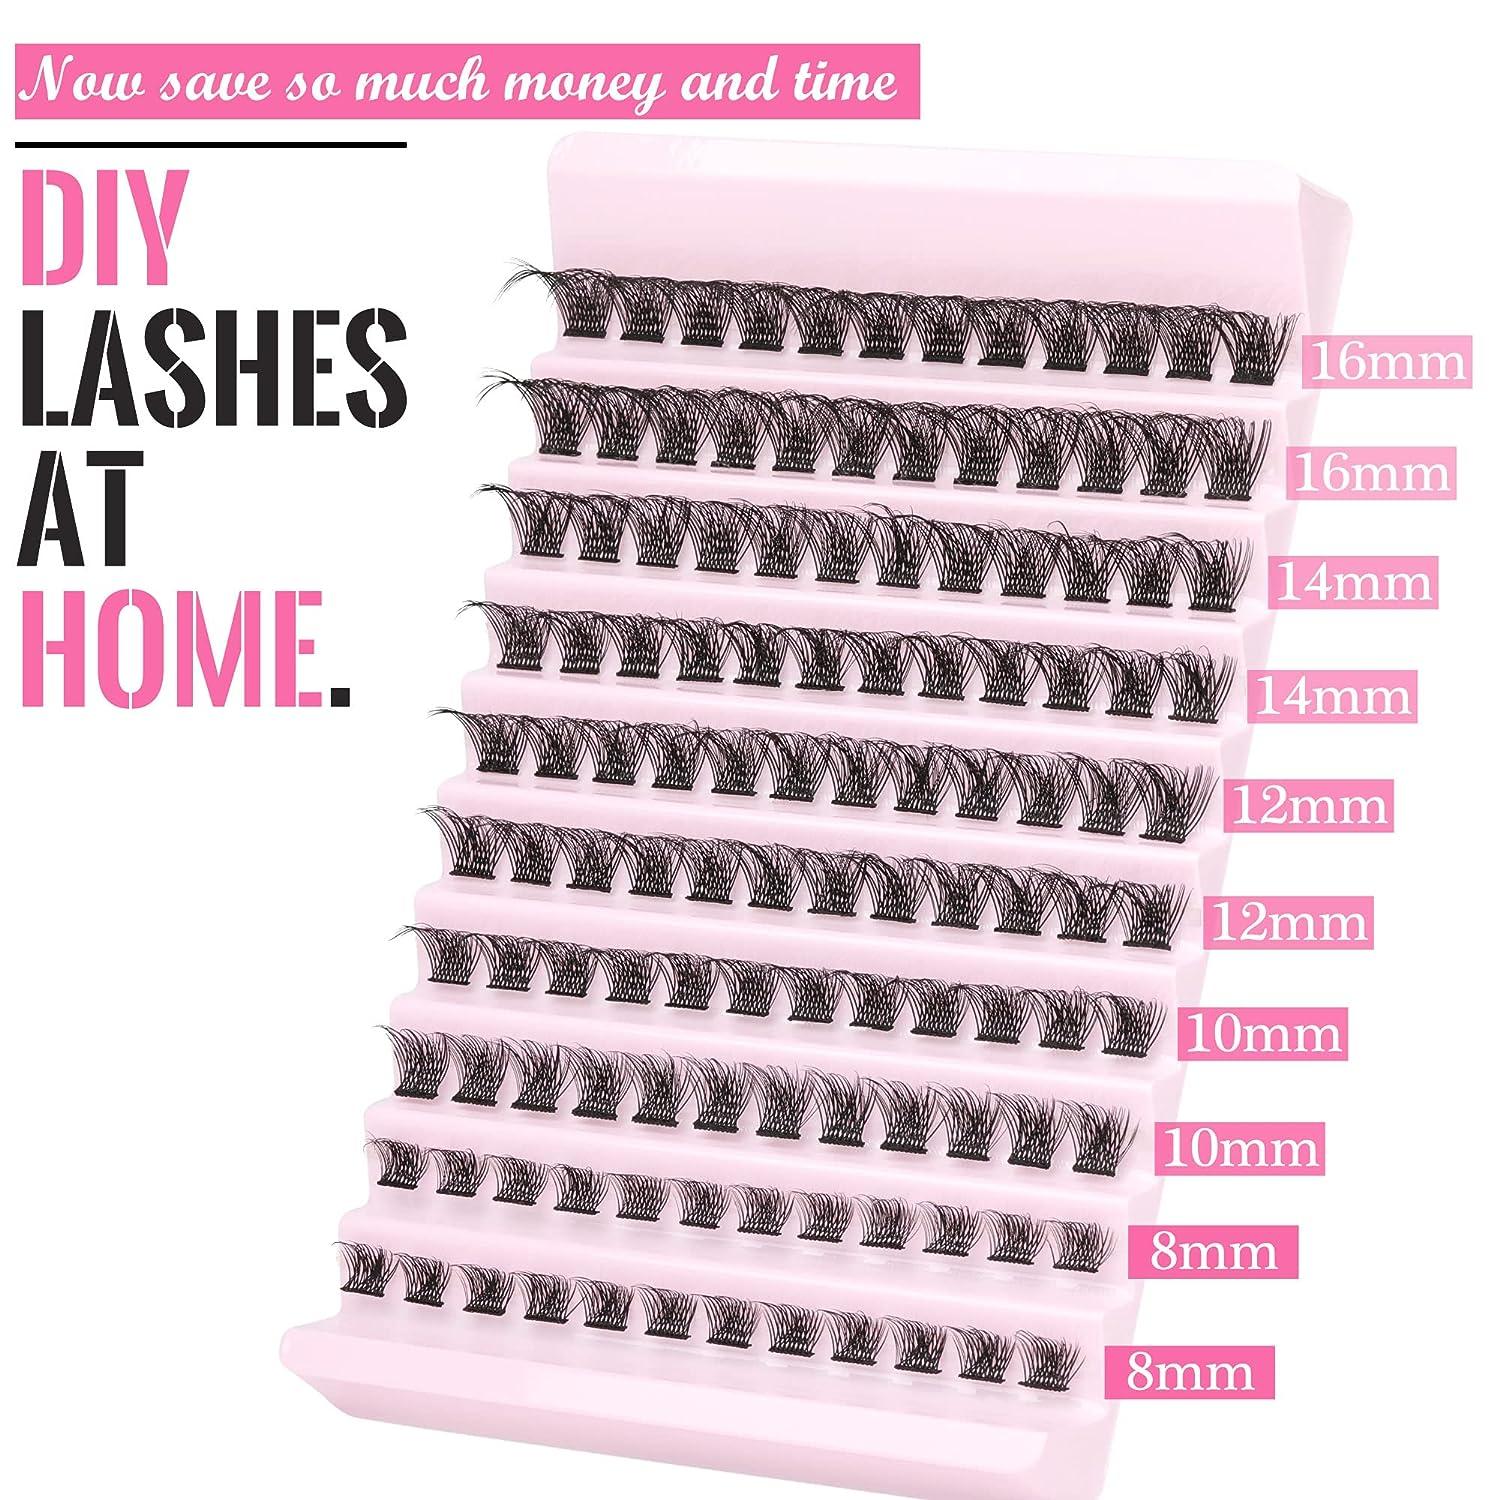  Lash Clusters Natural Wispy Cluster Lashes 8-16mm Wispy  Individual Lashes Extensions Natural Look Lashes D Curl Fluffy Cluster  Lashes DIY Eyelash Extension by Focipeysa : Beauty & Personal Care